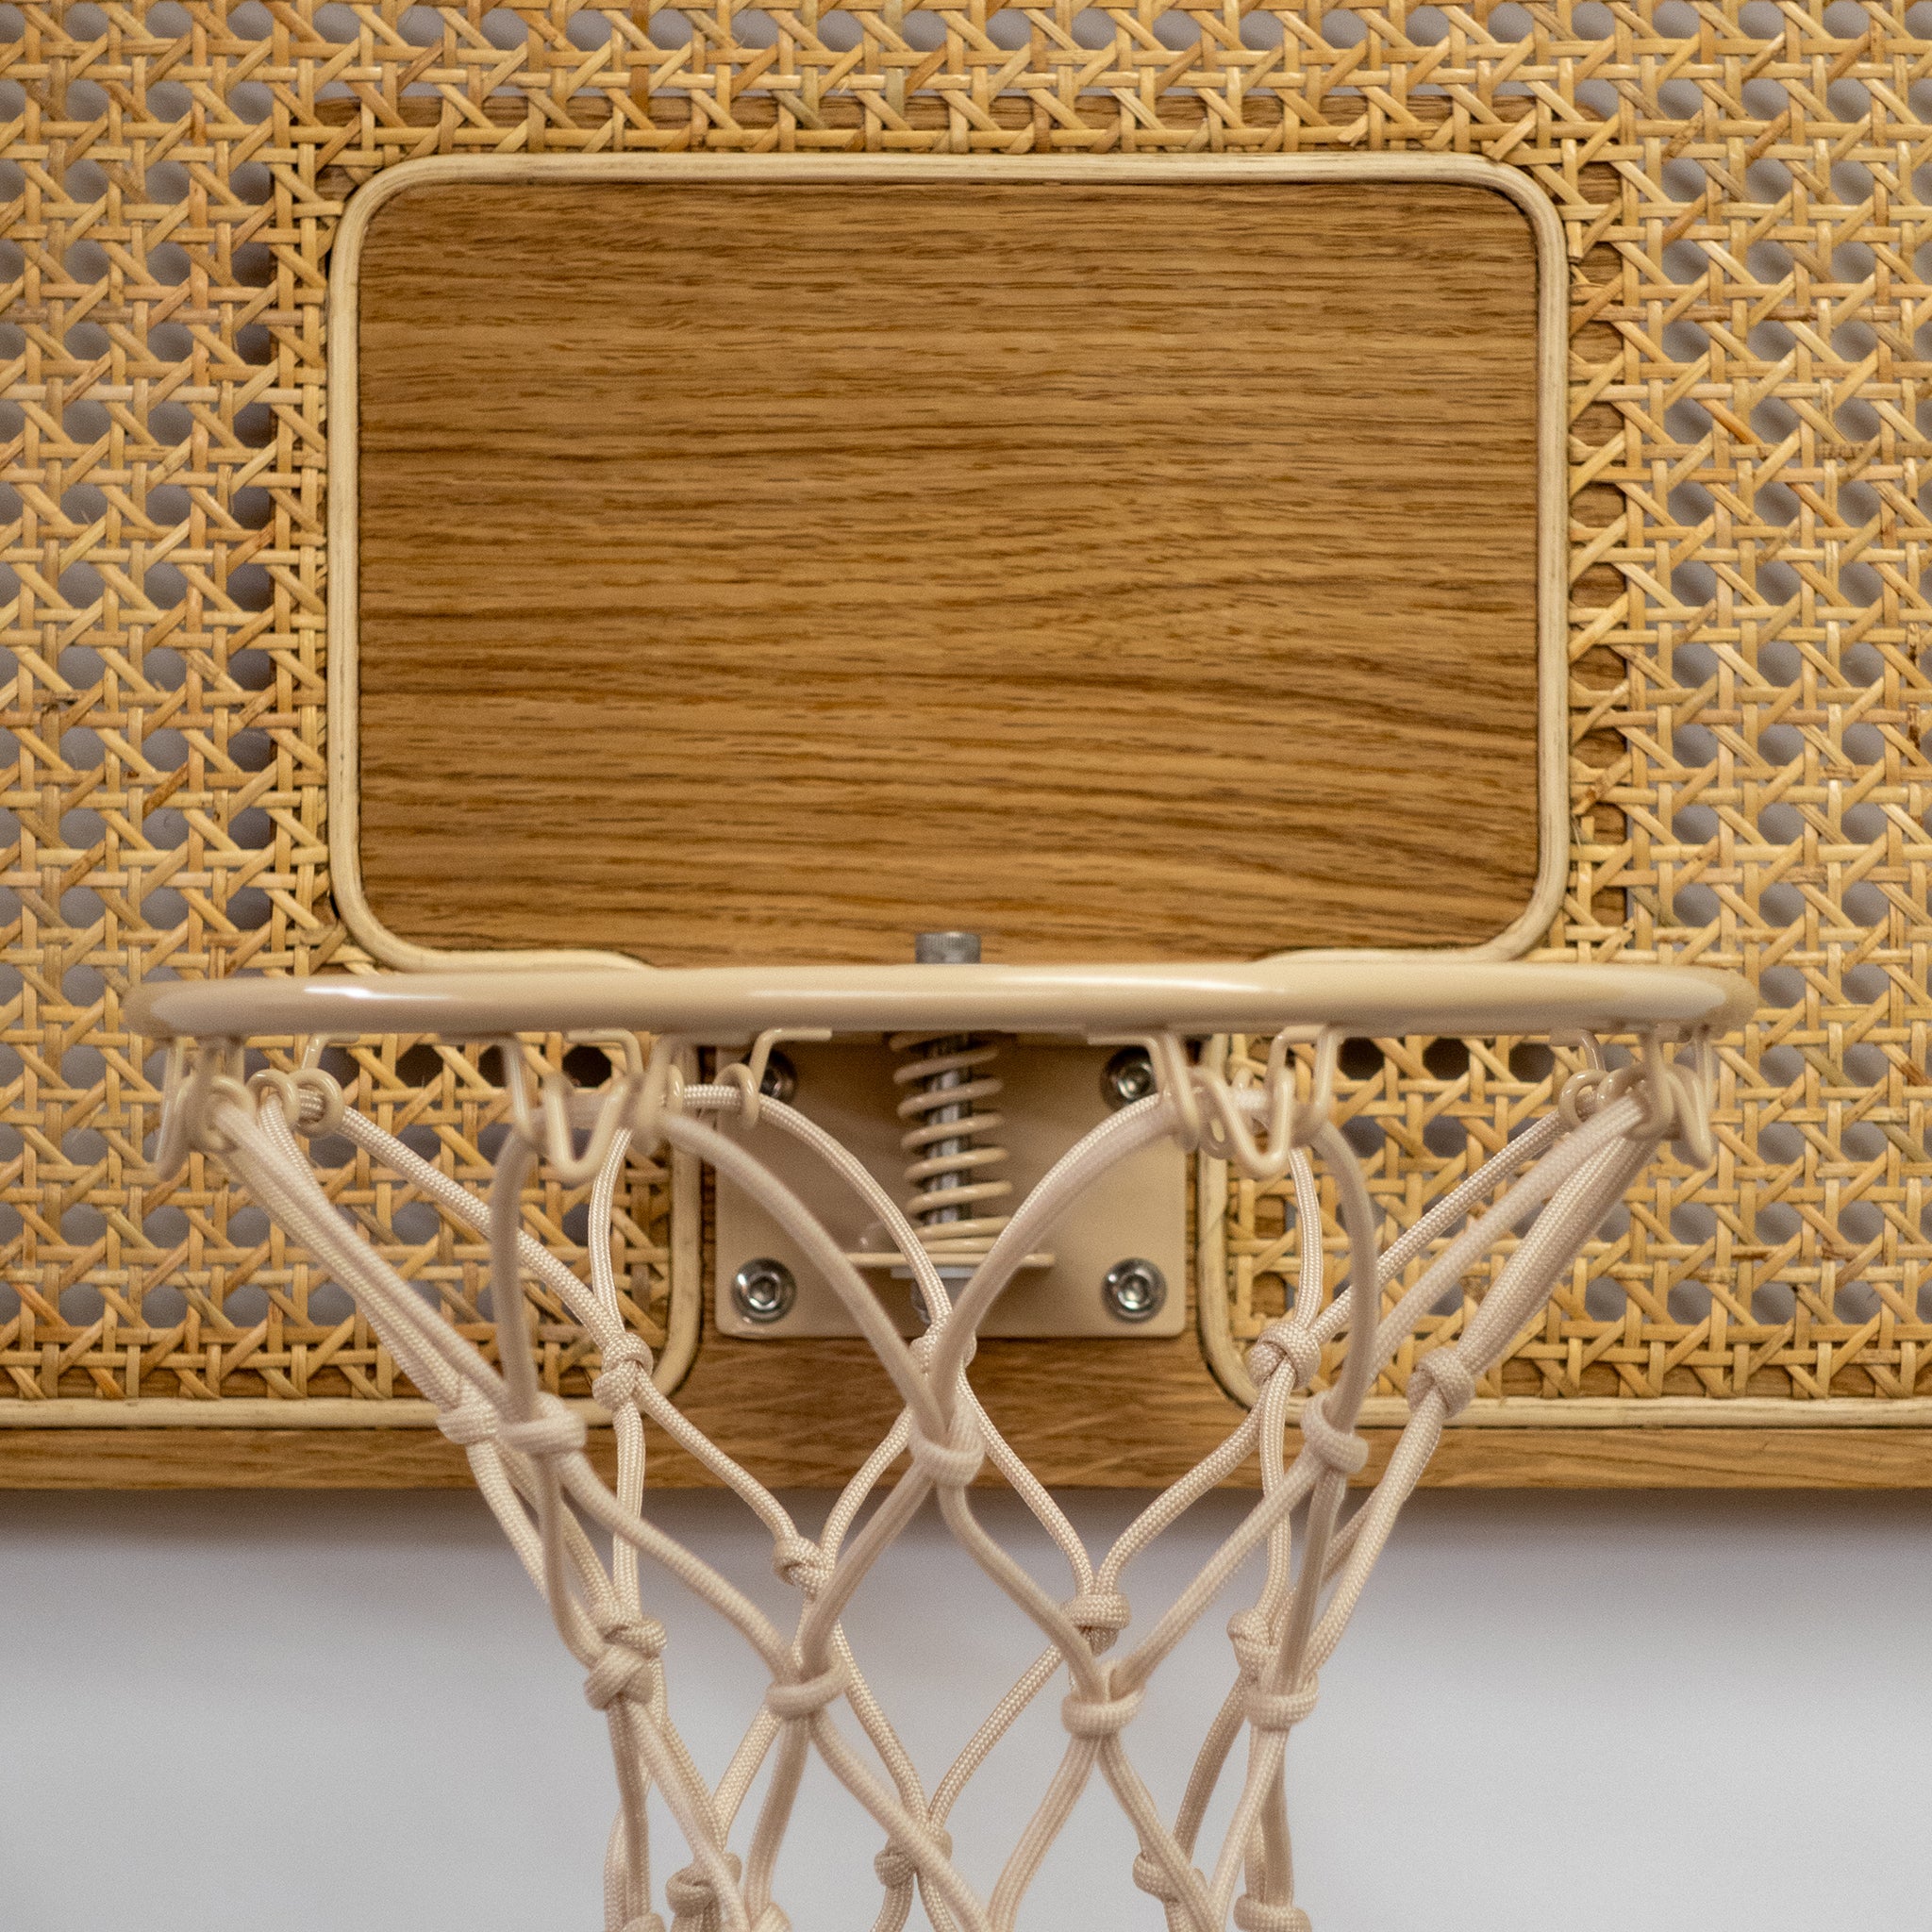 wall mounted mini basketball hoop made from rattan and white oak